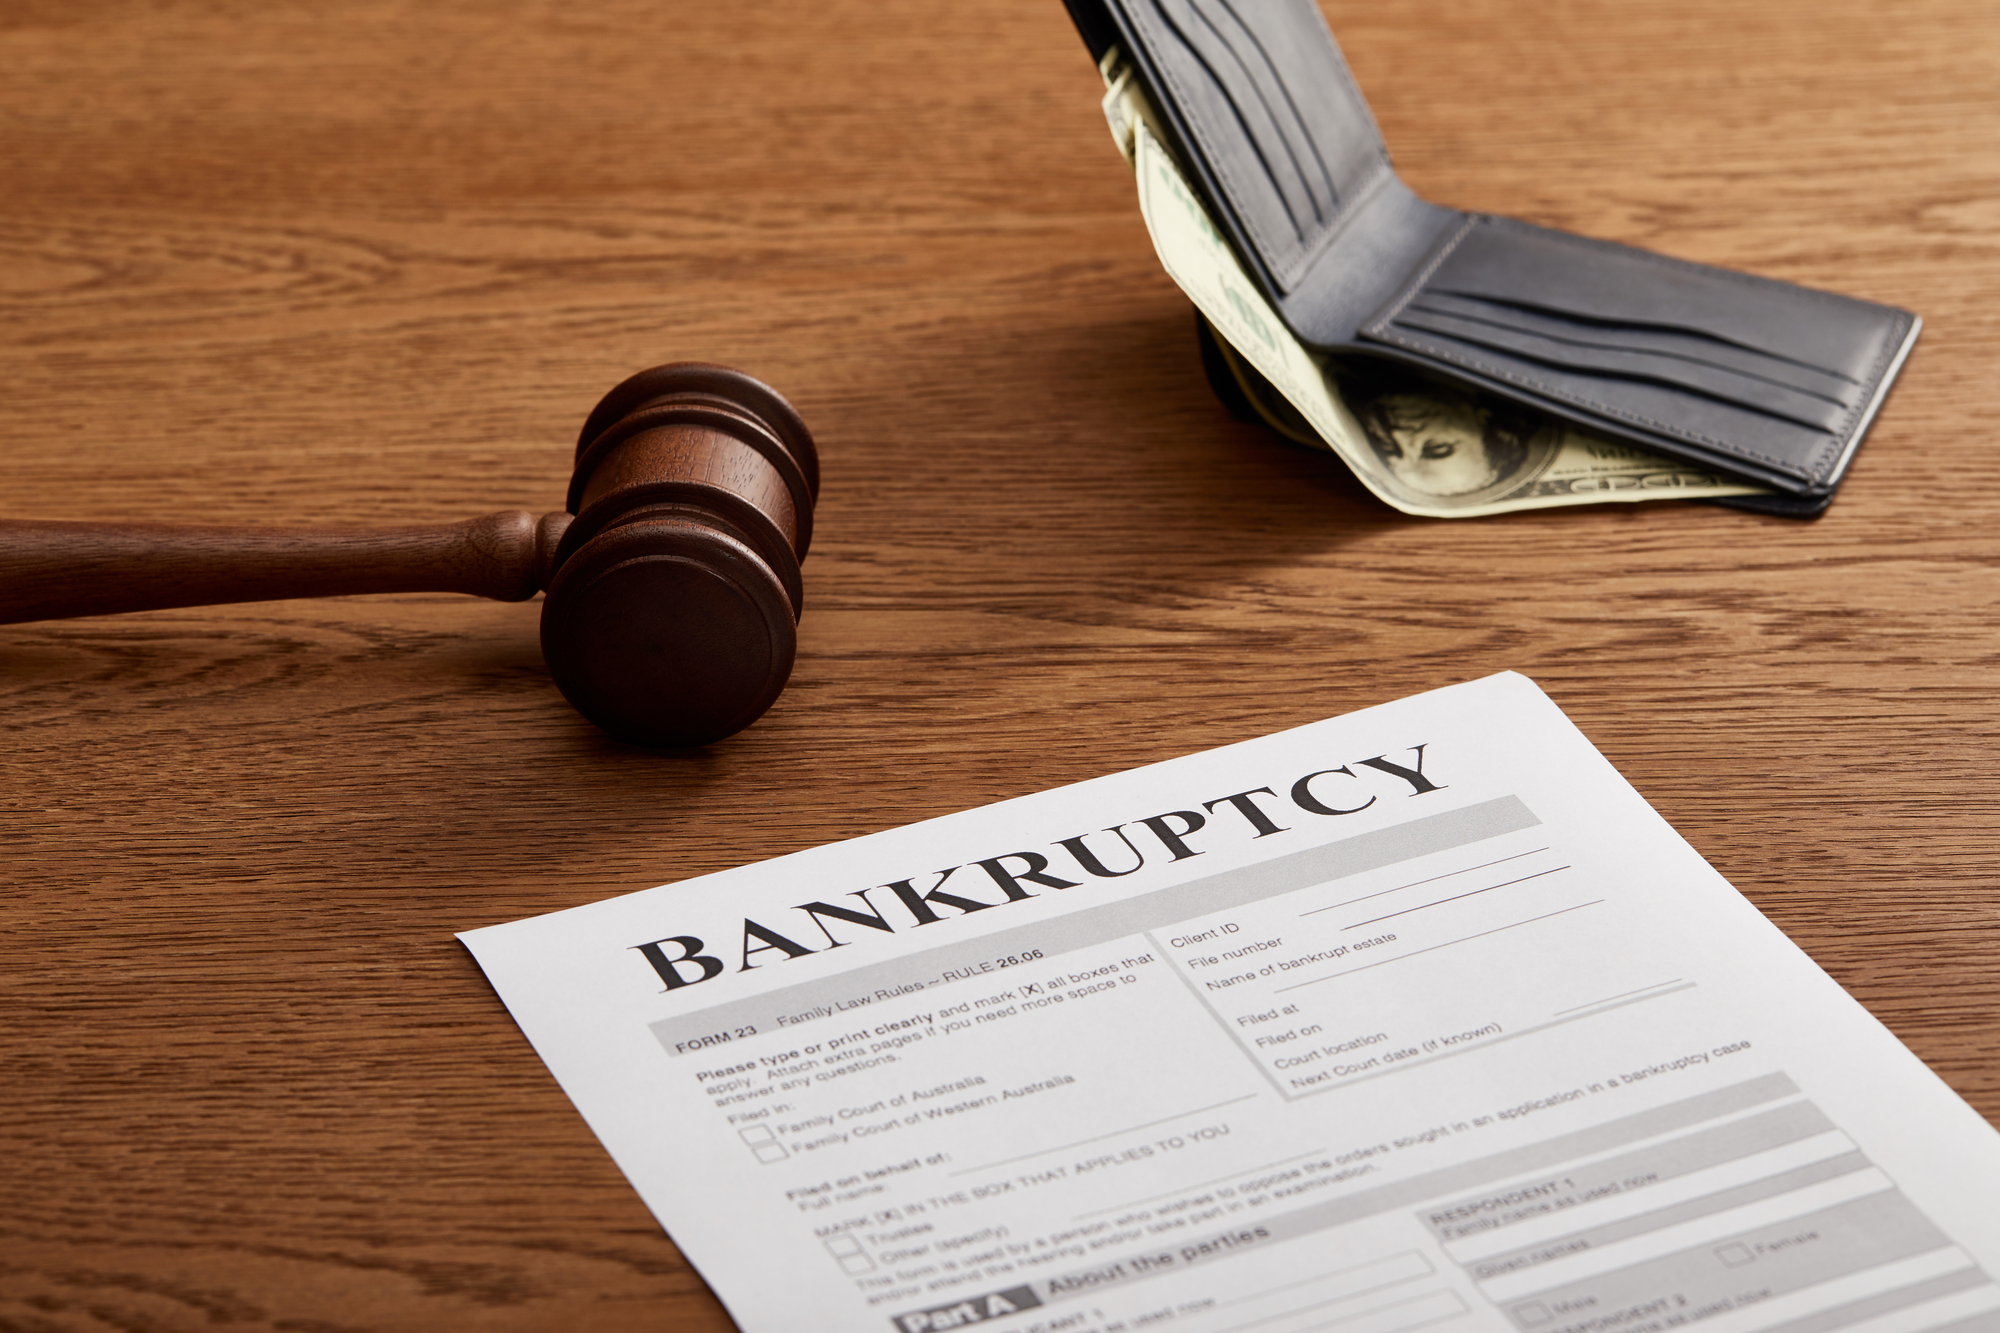 Here's What You Need to Know about Business Bankruptcy